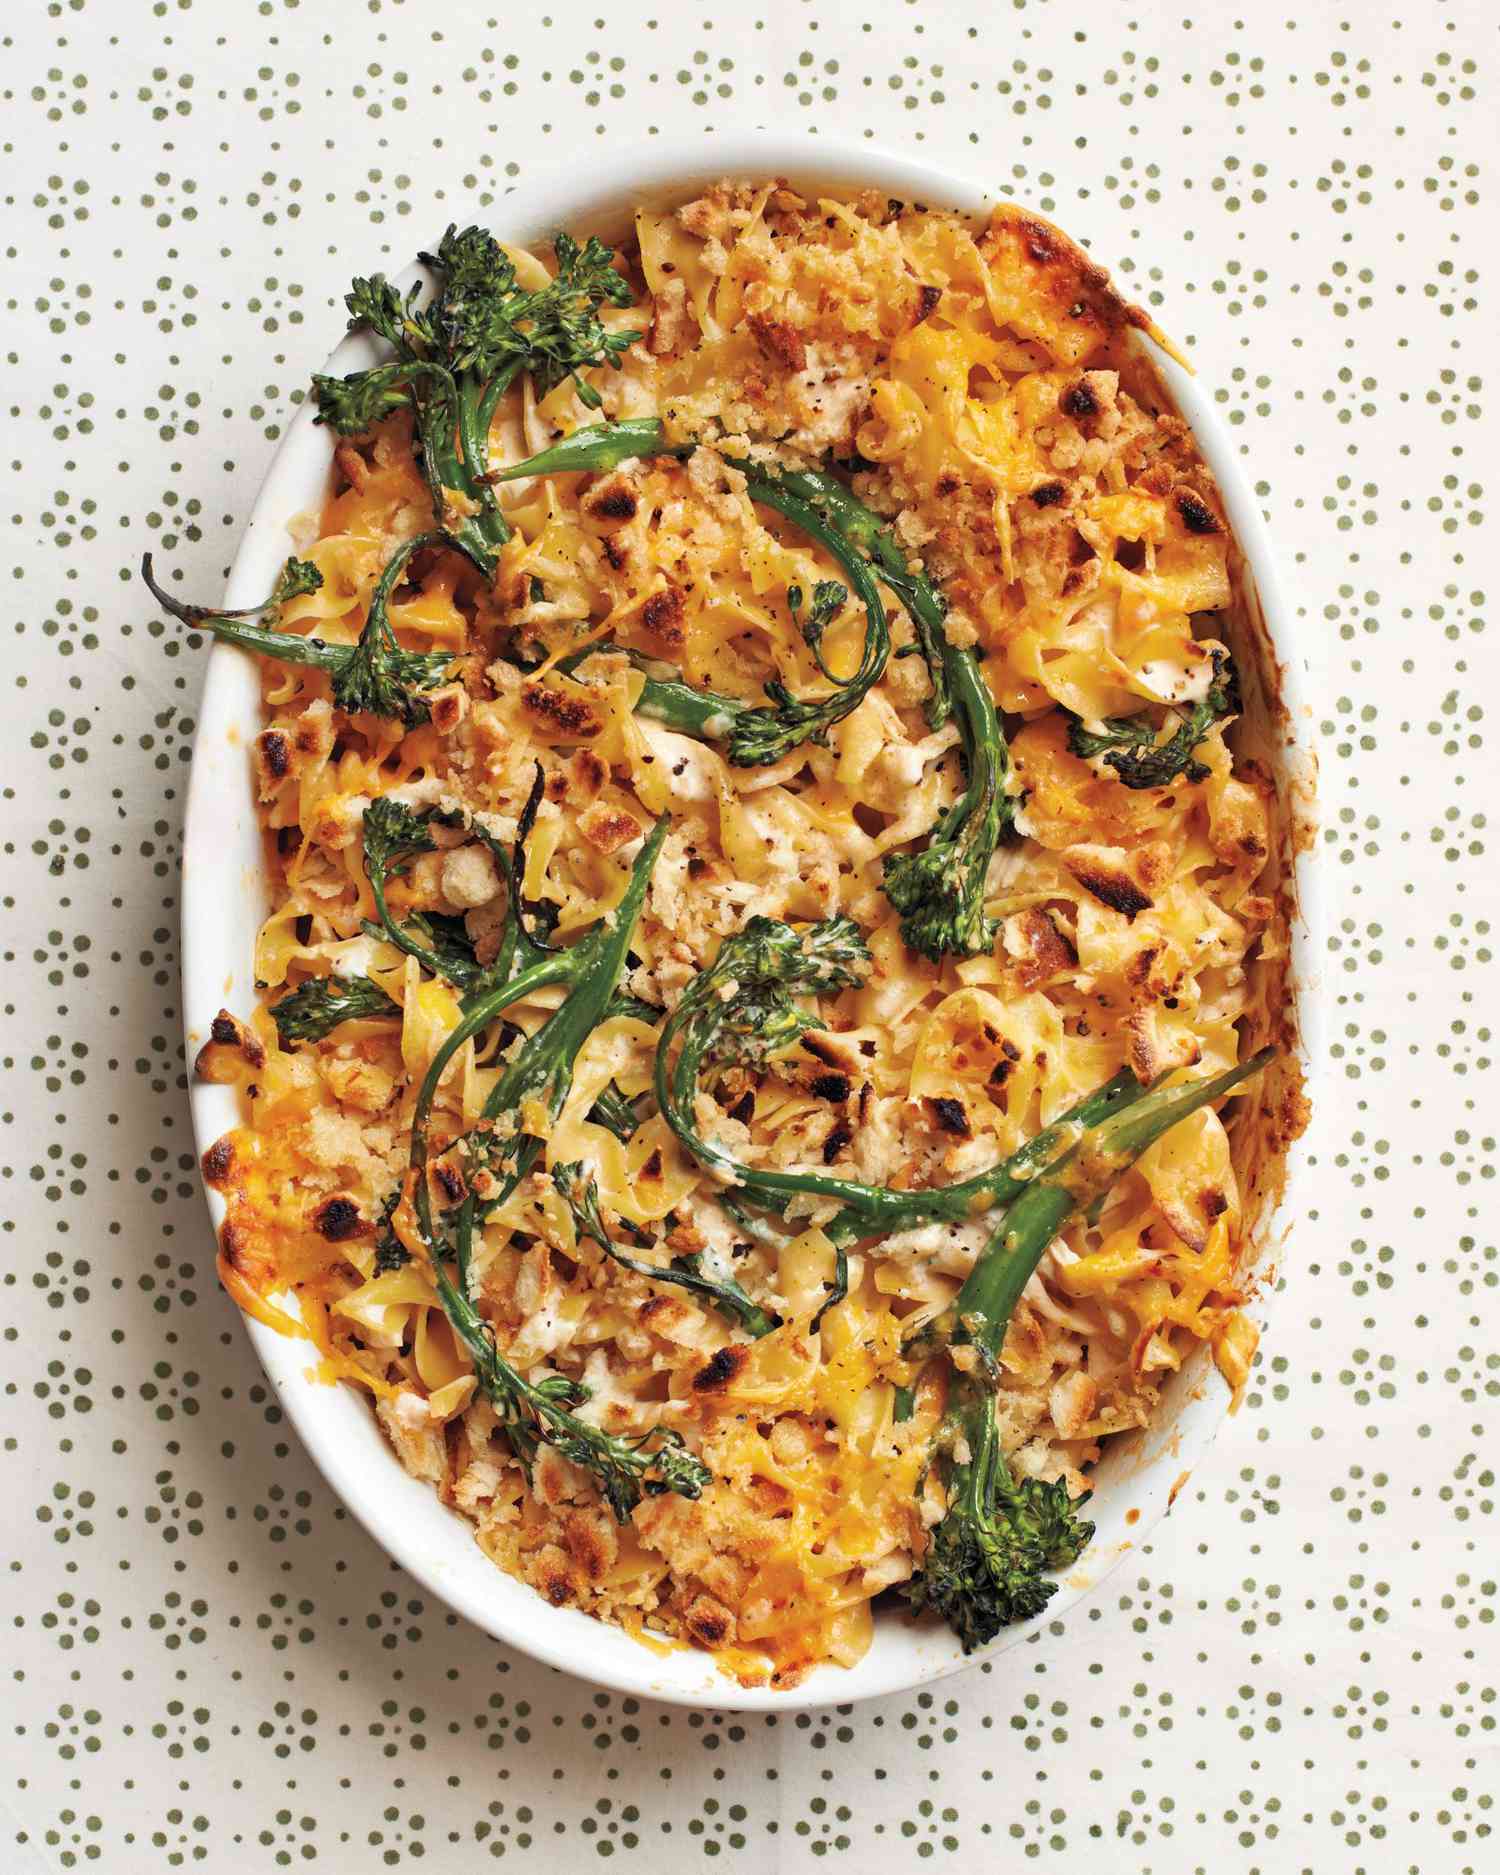 Chicken-and-Broccolini Mac and Cheese